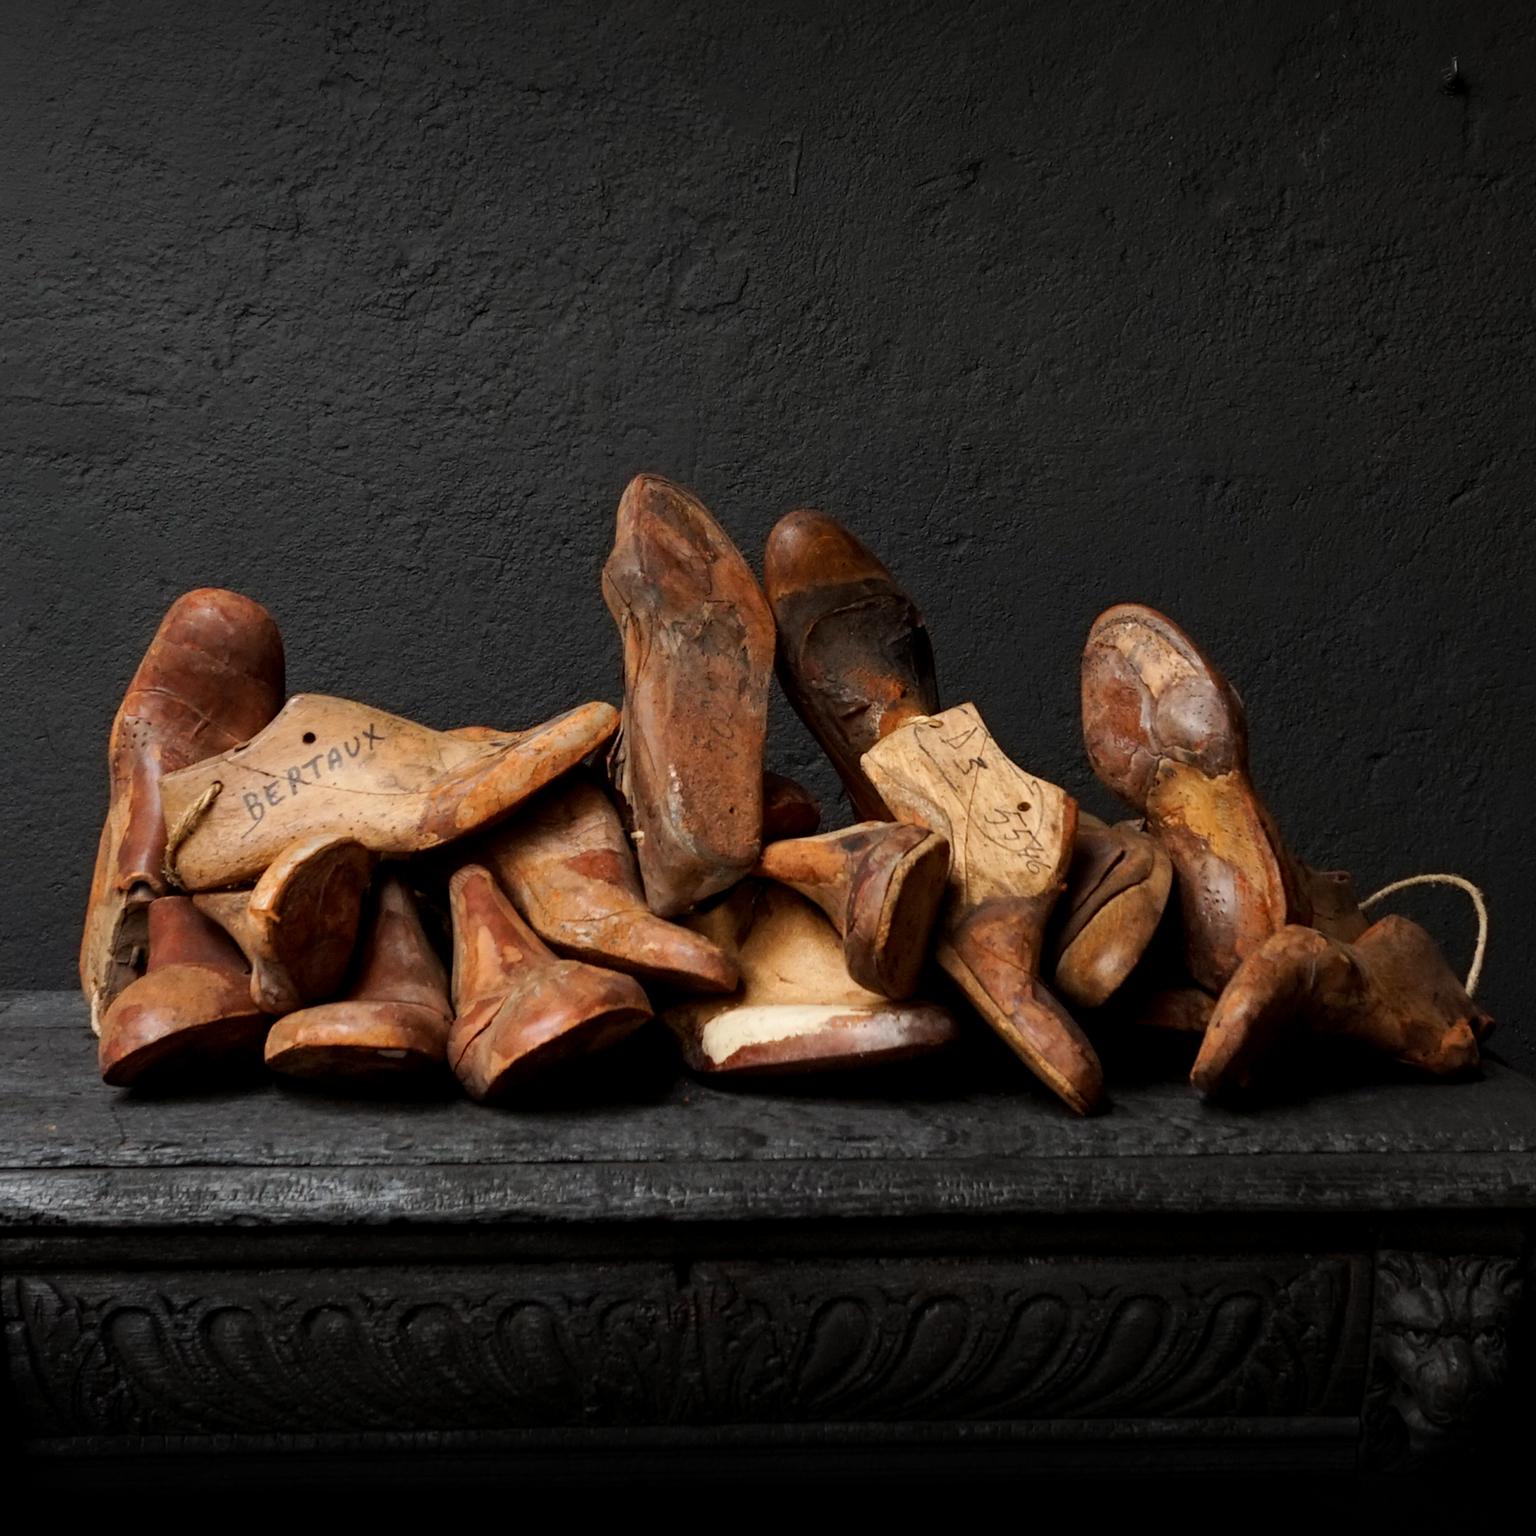 A little strange but very decorative set of 11 pairs of shoe lasts or wooden shoe moulds.
All pairs are orthopedic remodeled to fit various abnormalities on customers feet.

As you can see these lasts come in many styles and sizes.
Though the